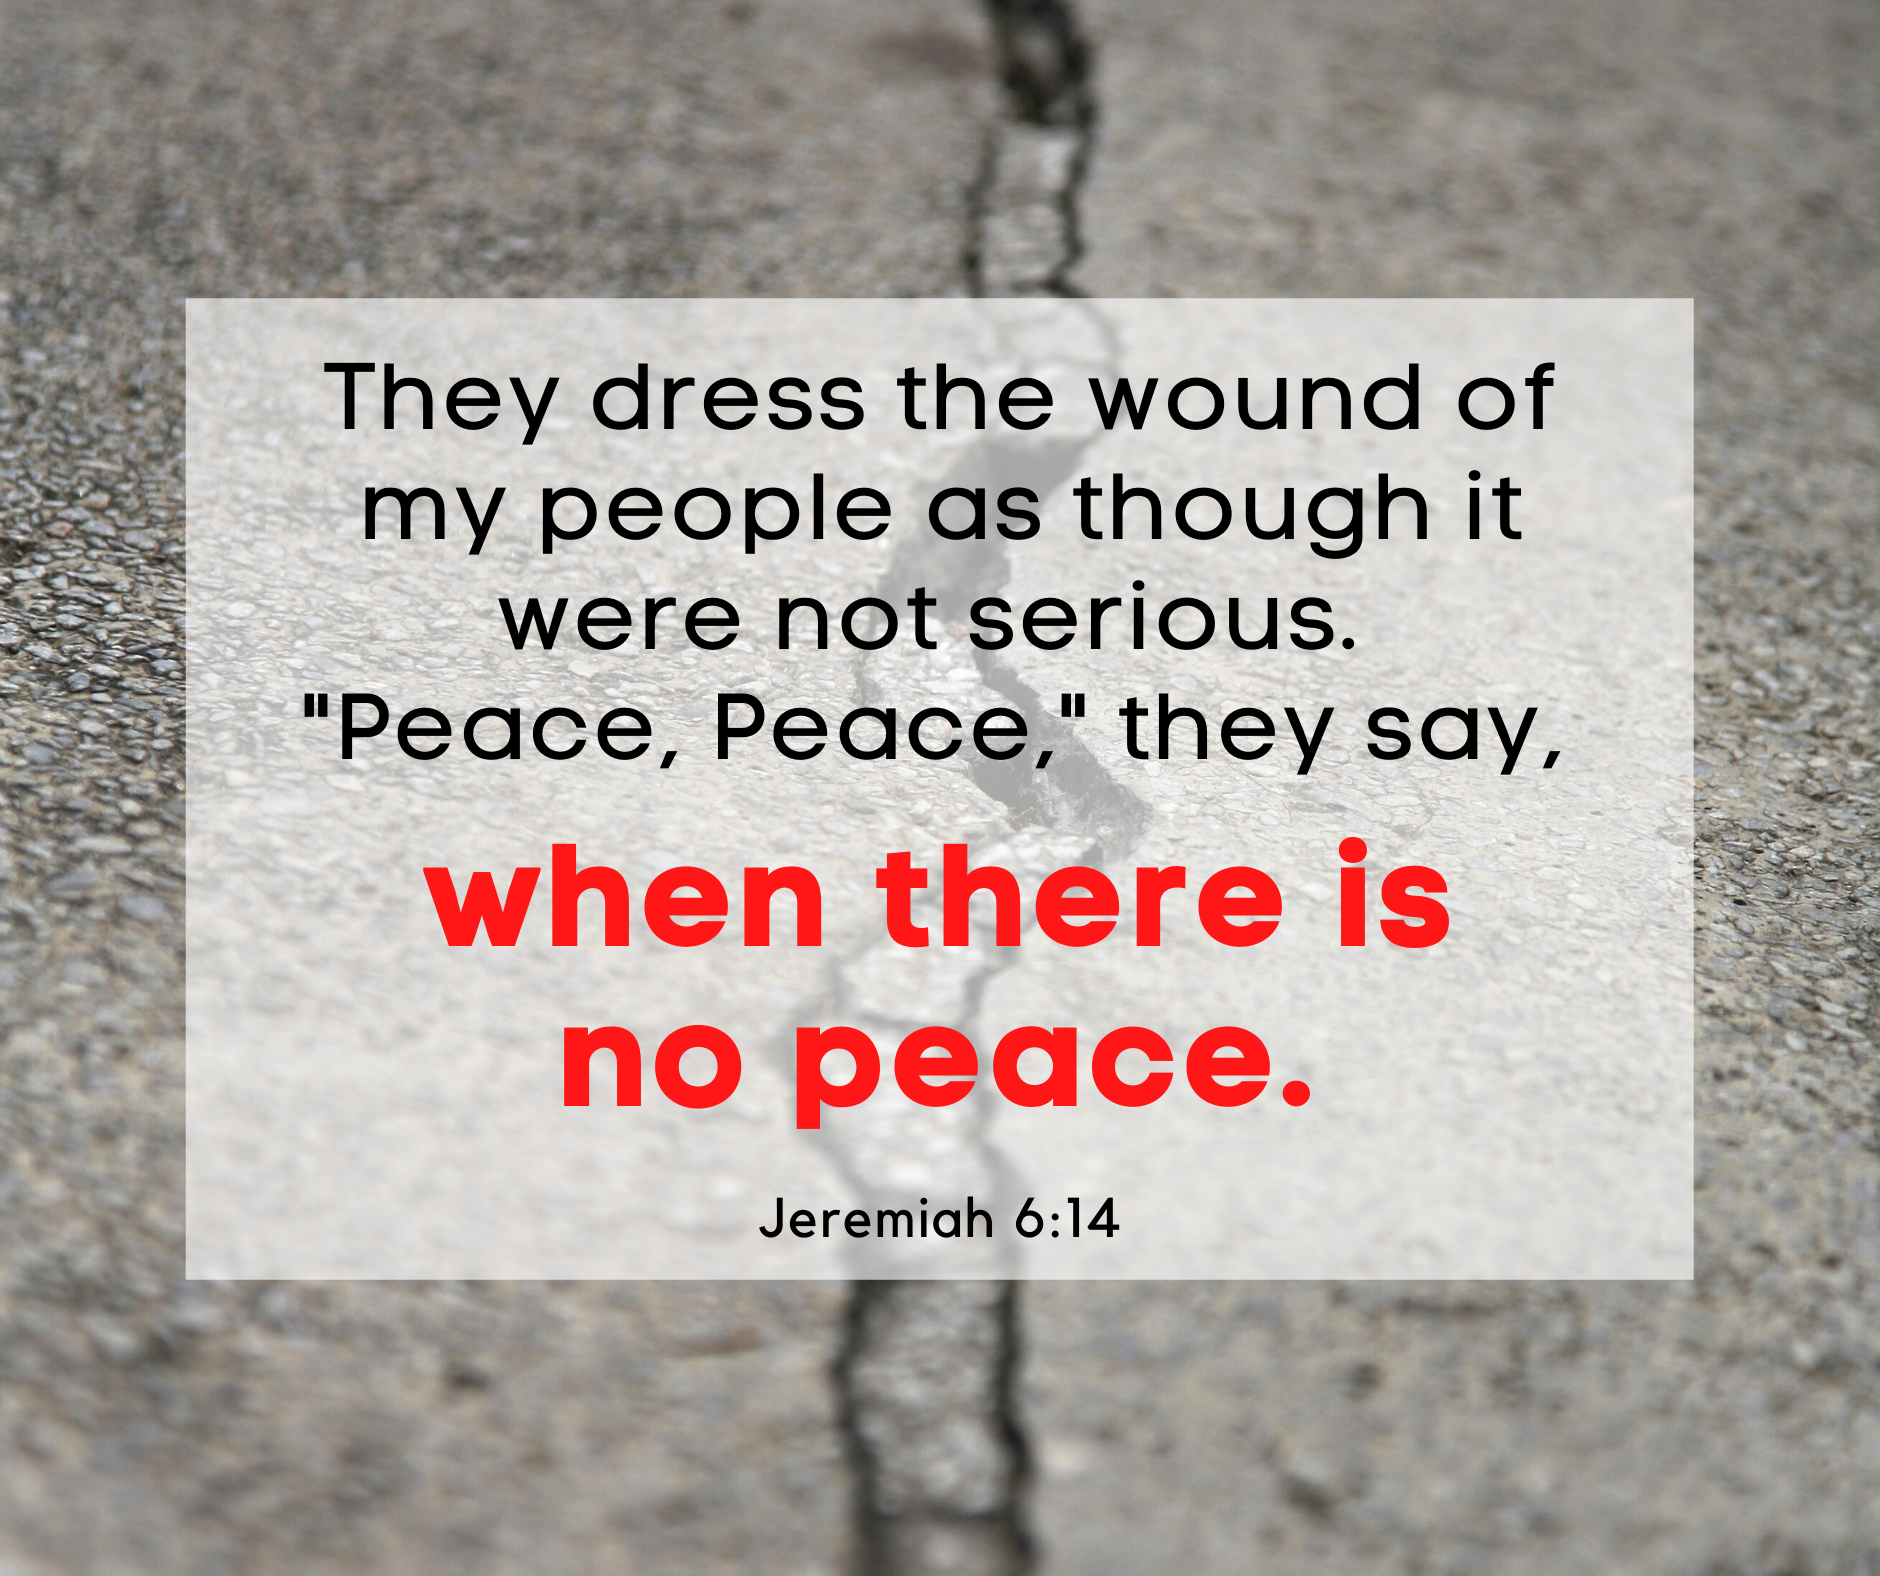 Quote from Jeremiah 6:14